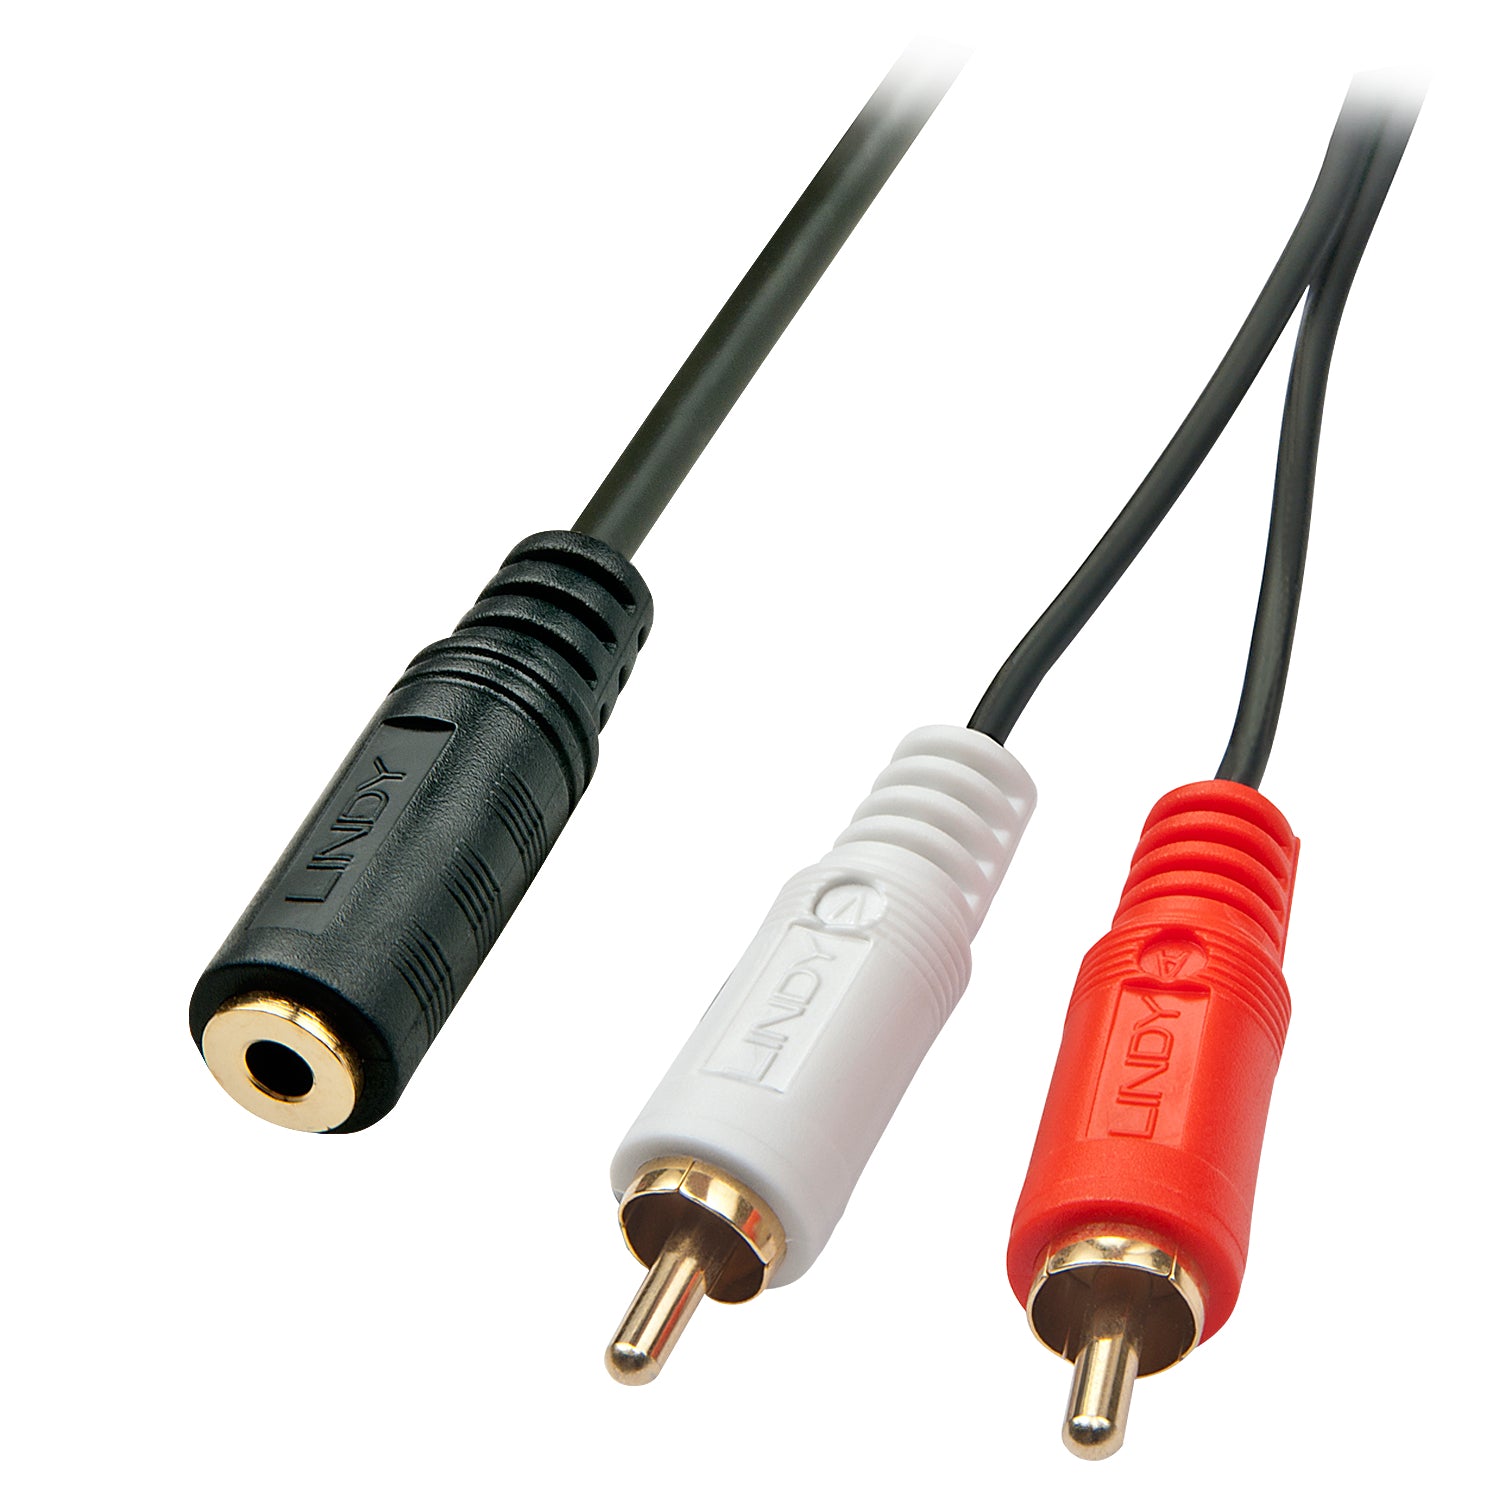 Audio/Video Adapter Cable